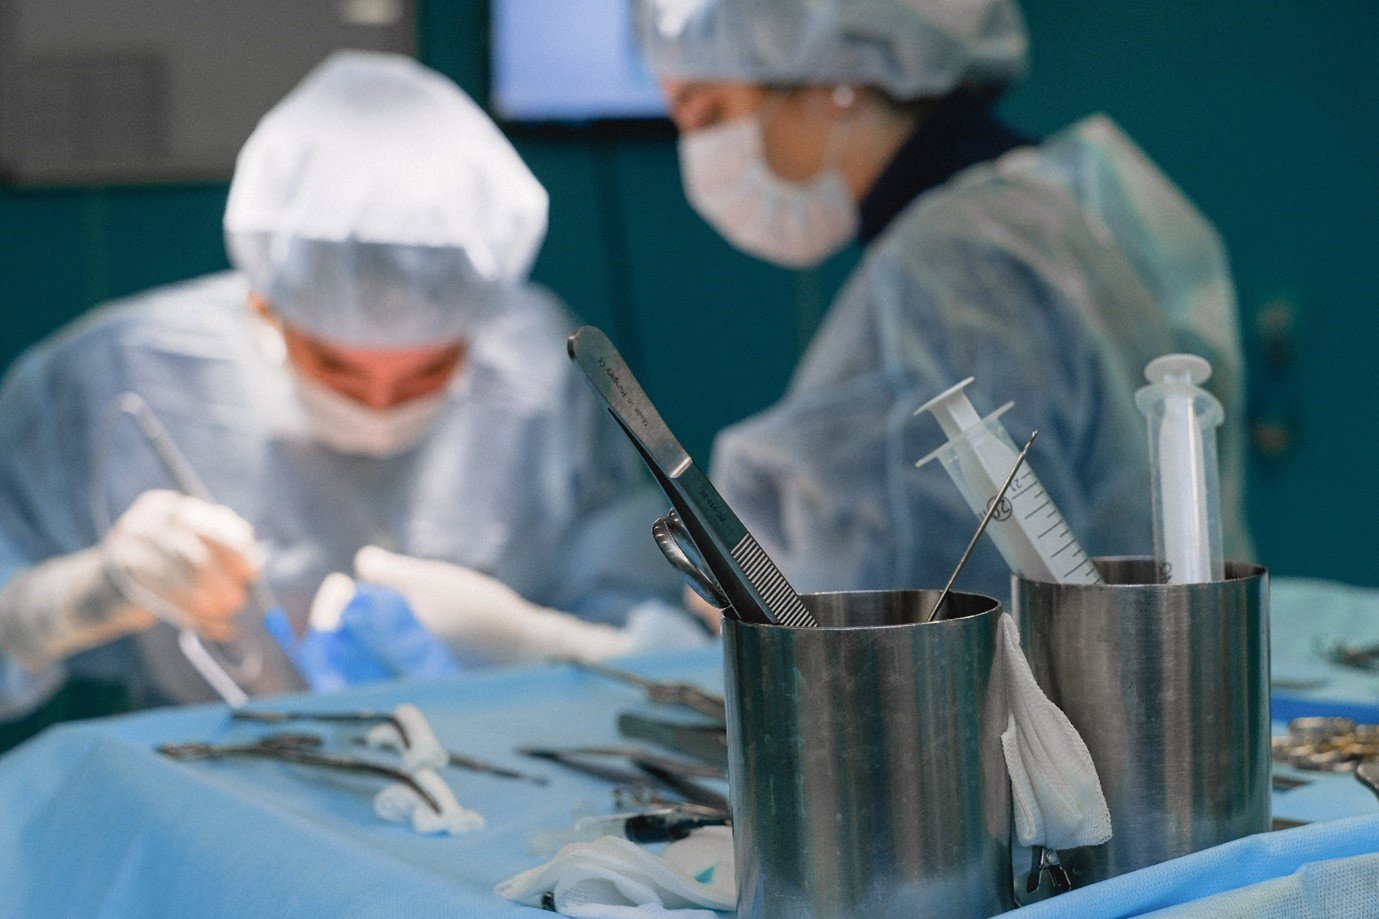 two people performing surgery